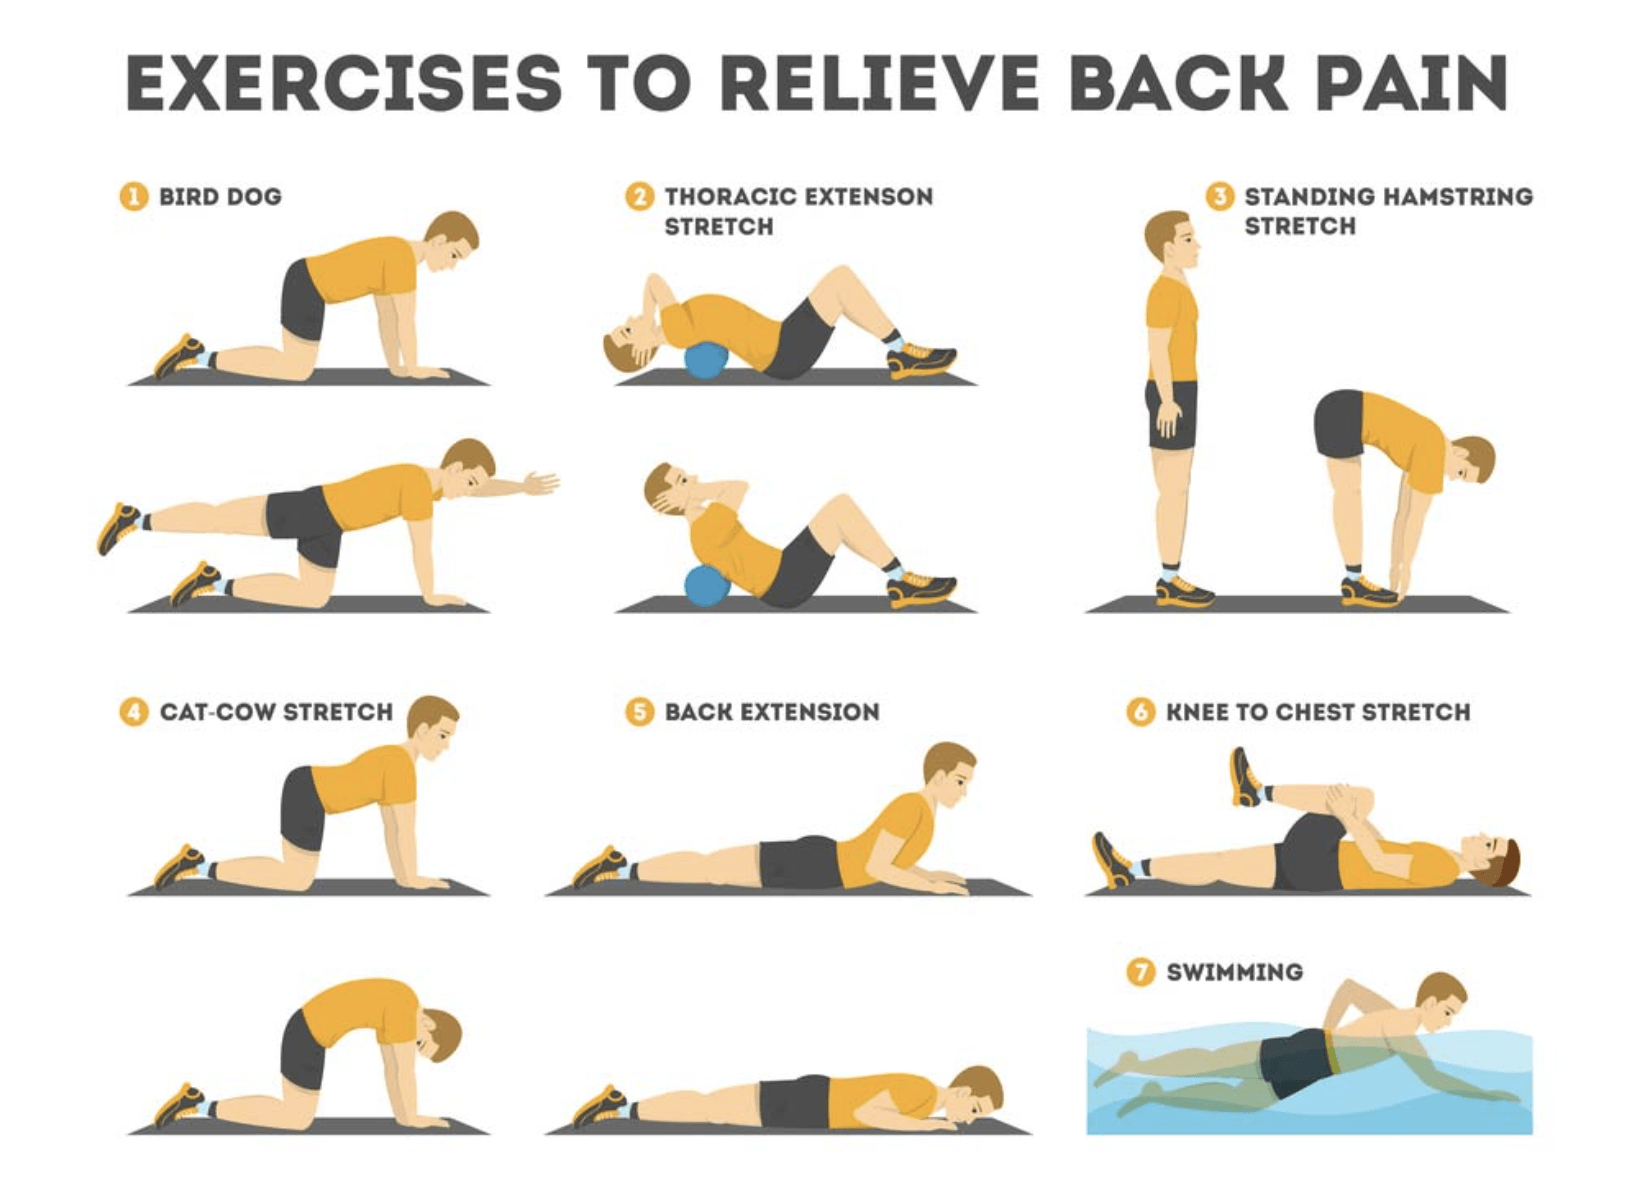 Lower back pain? Here are few exercises that can help - Kay Spears